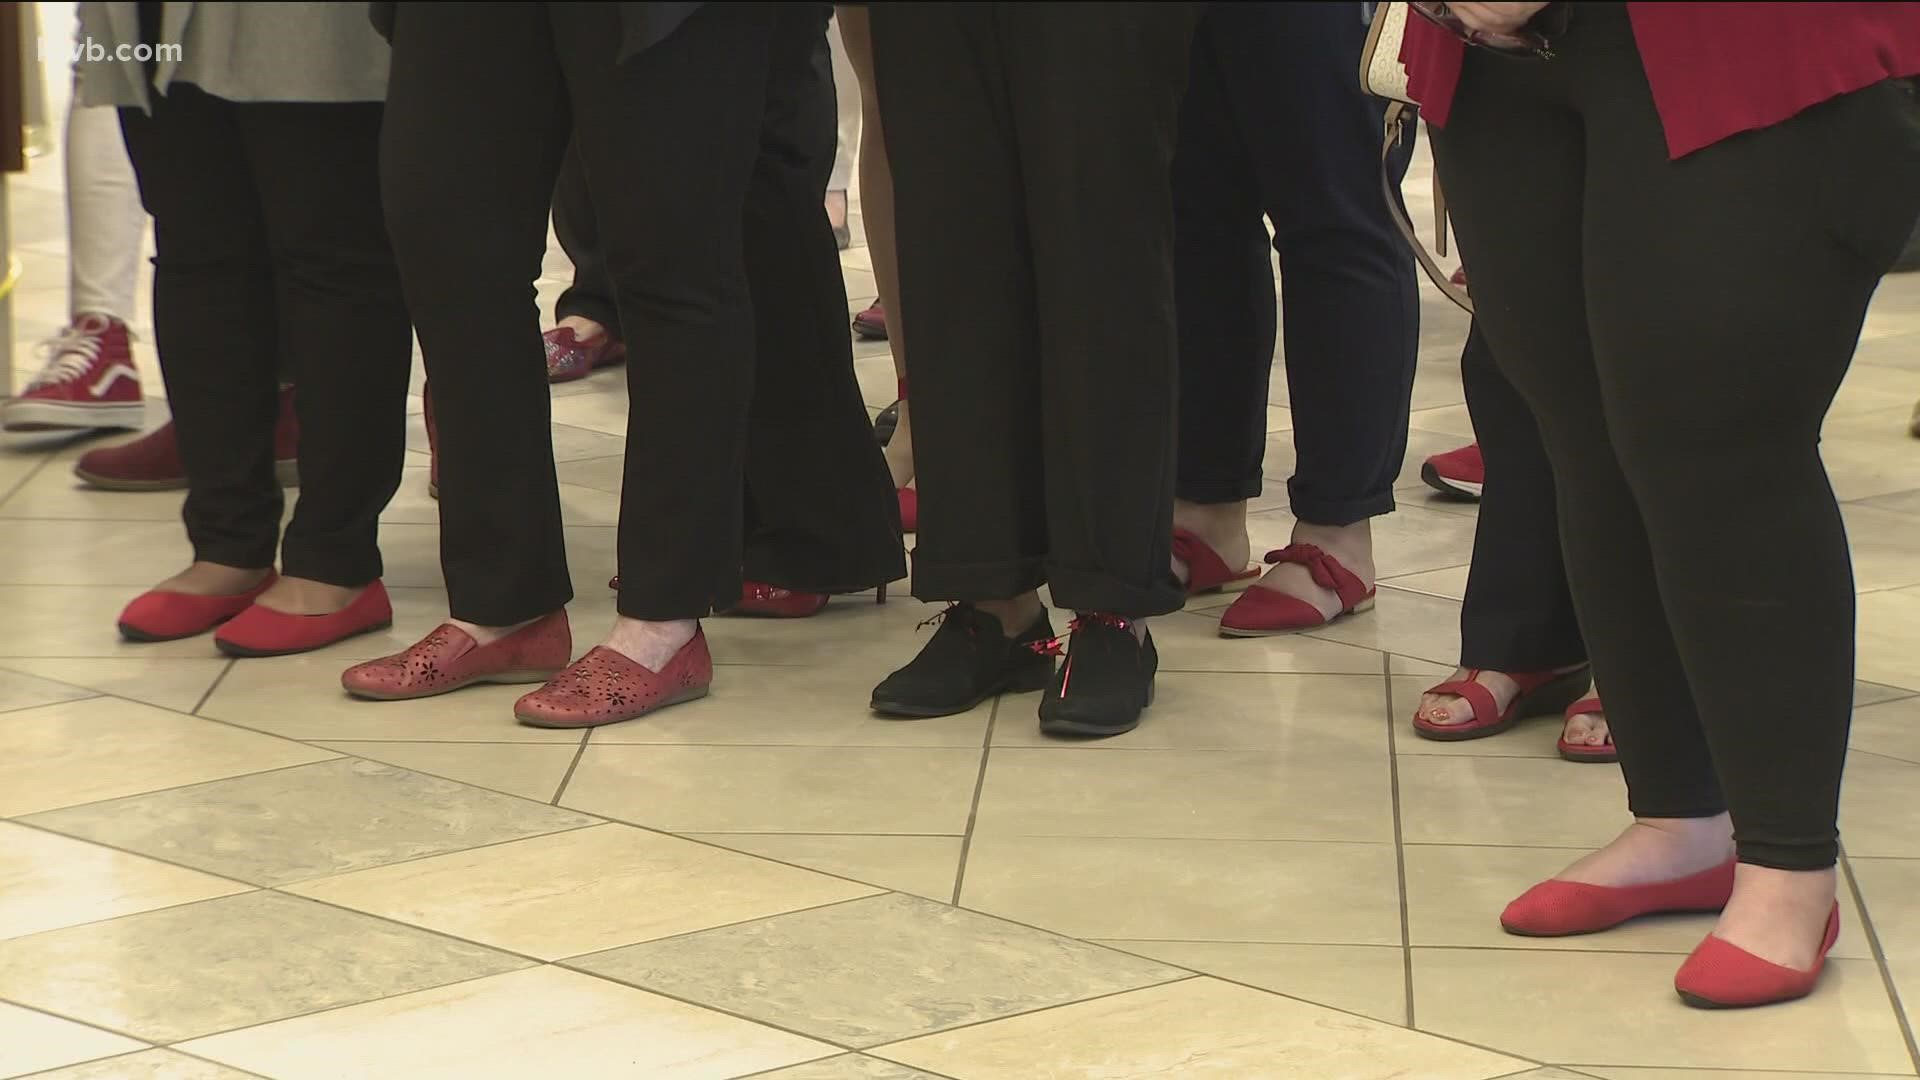 Red shoe recognition to celebrate women's history month